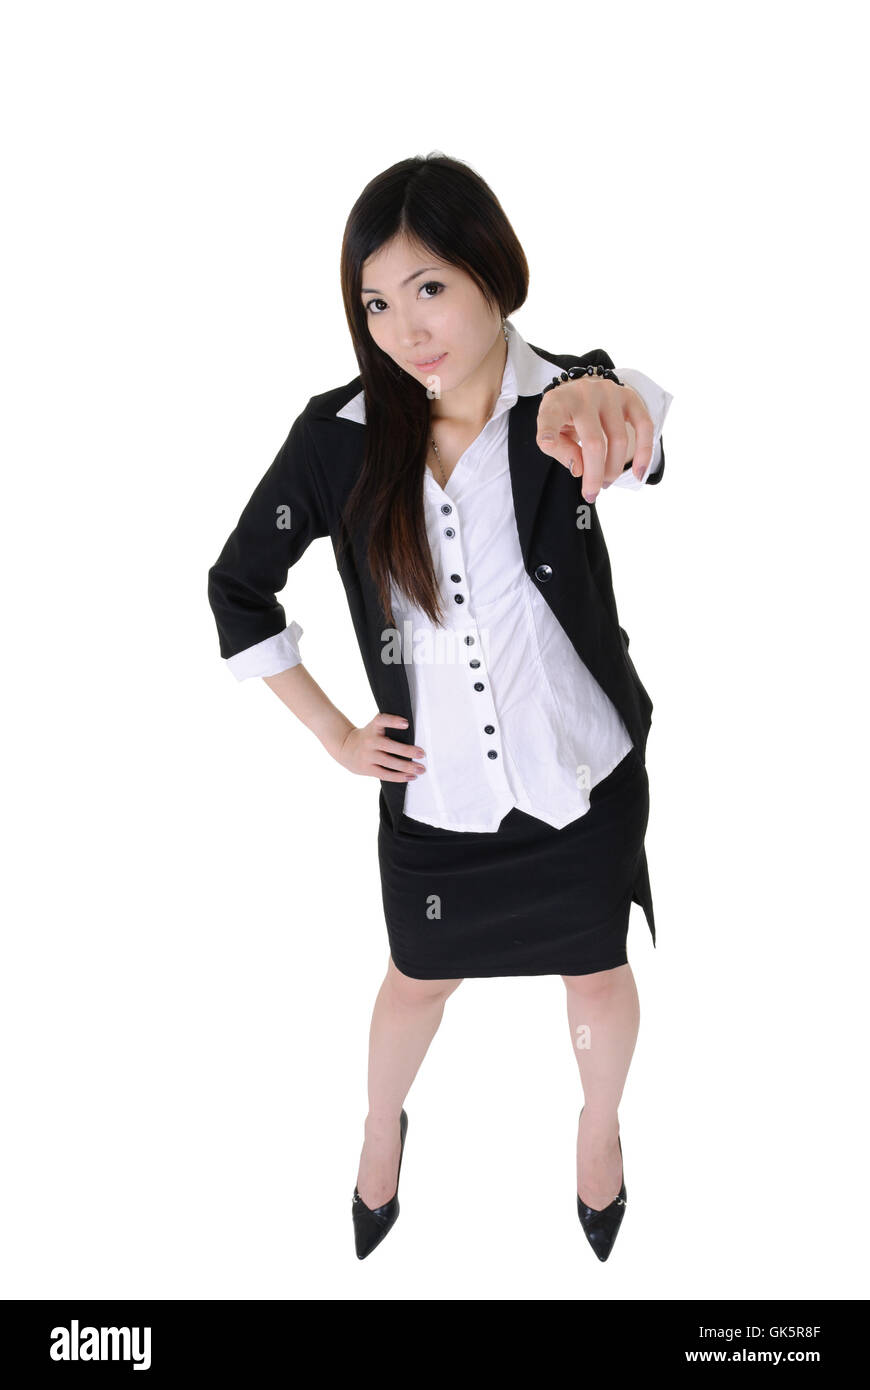 woman lady business dealings Stock Photo